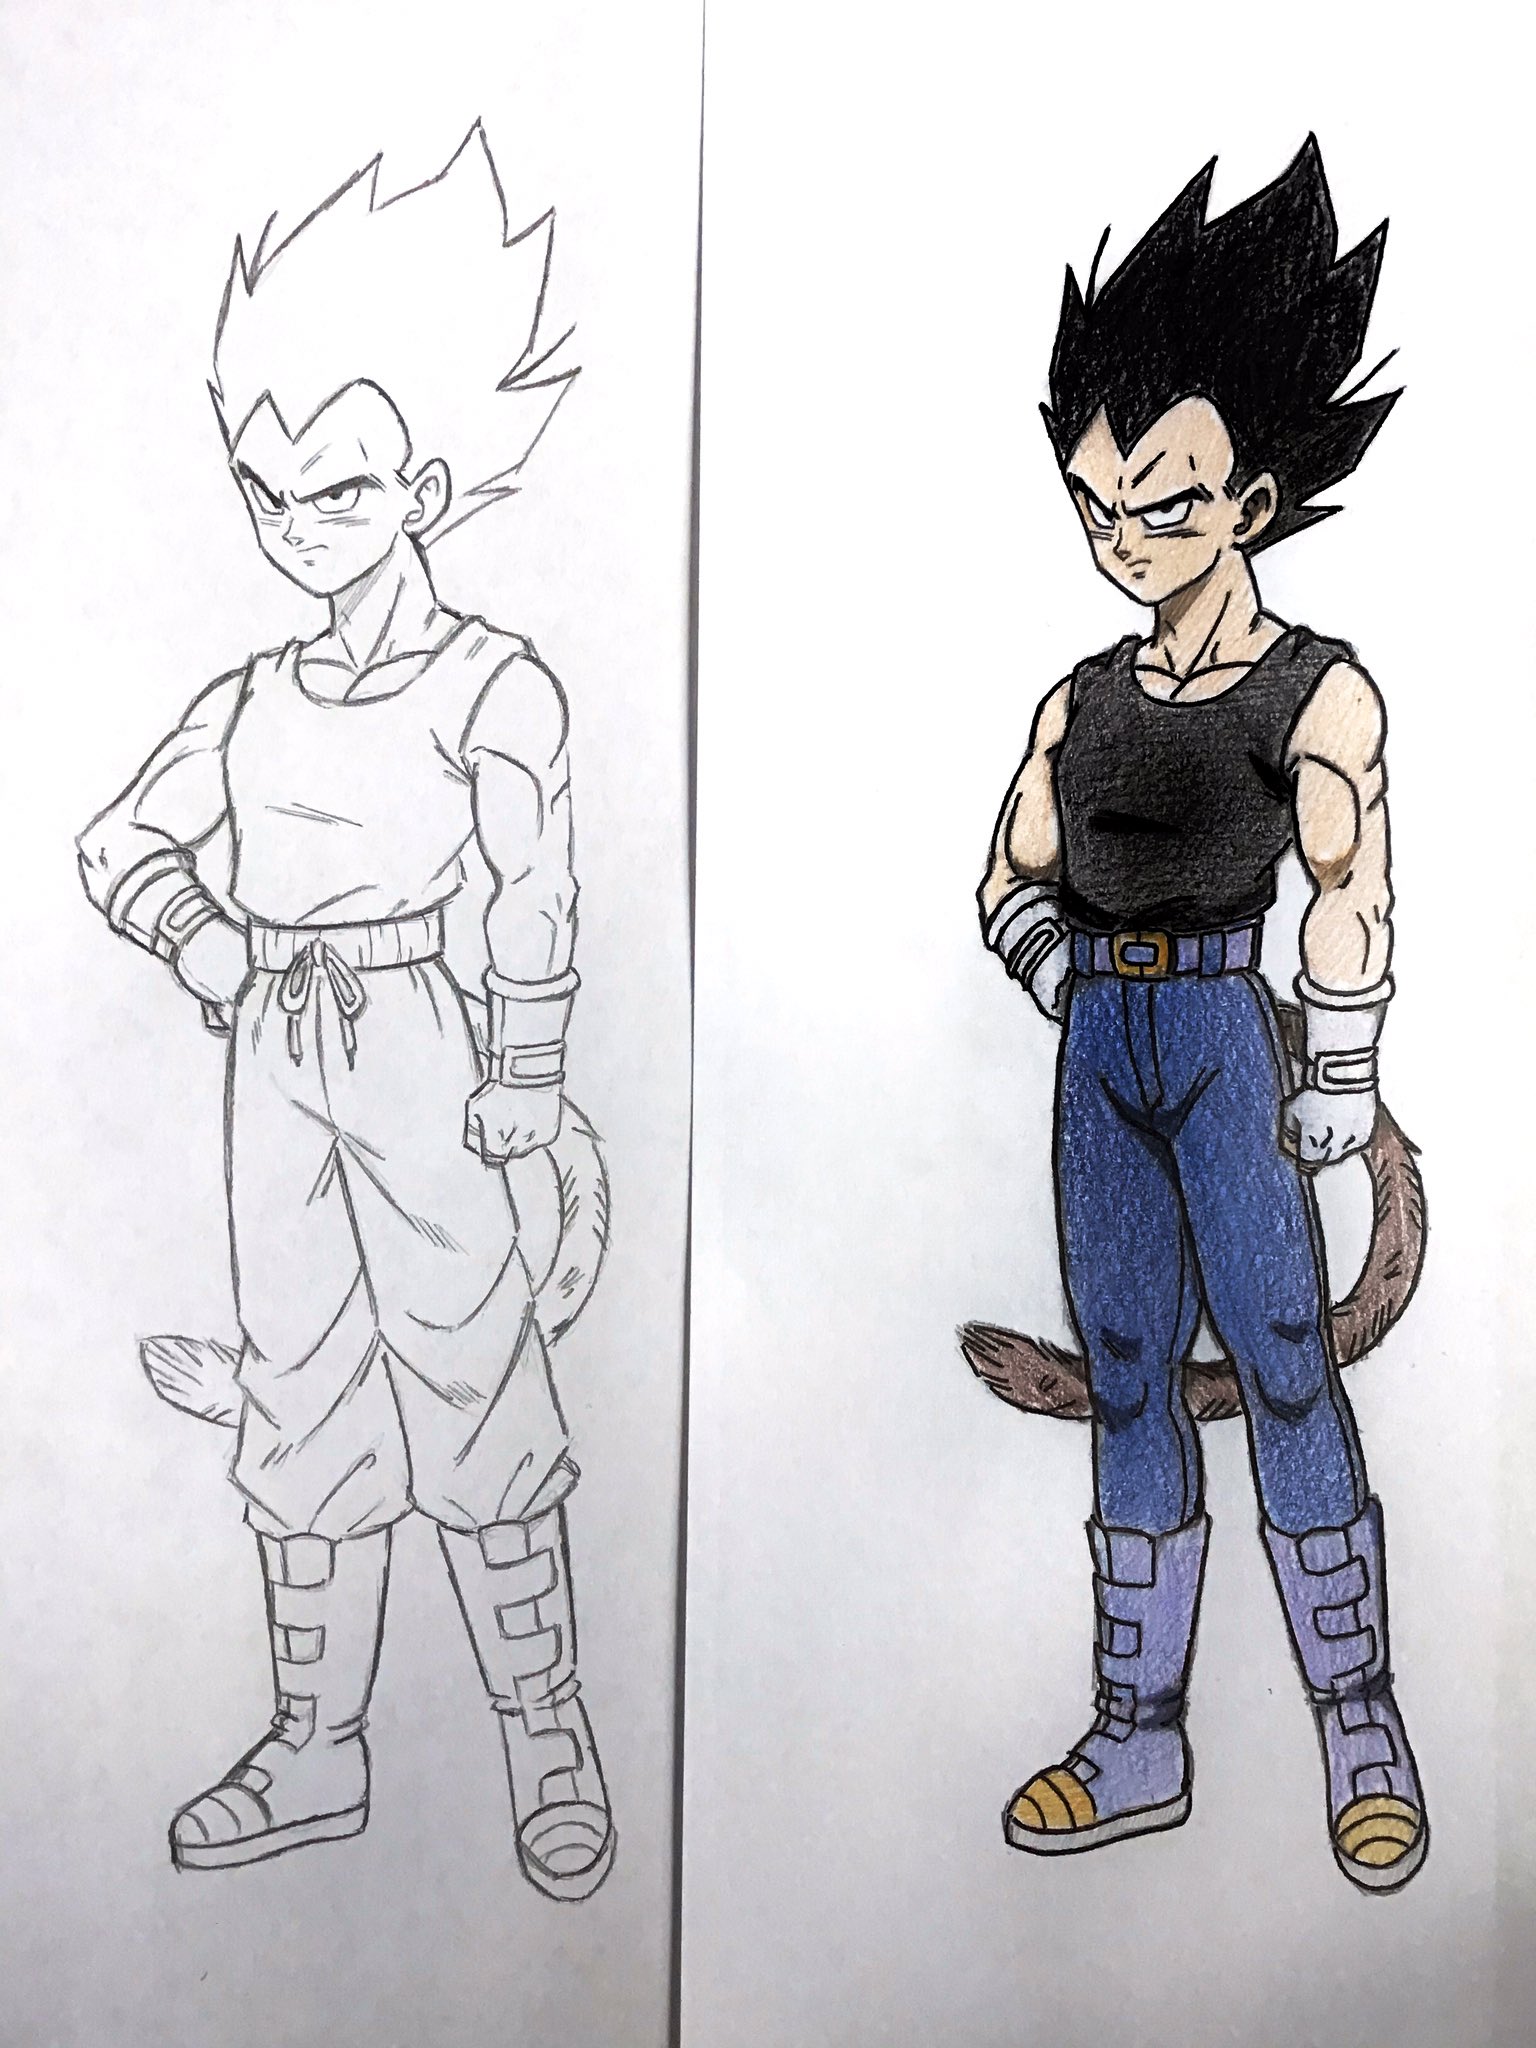 Ty'ren Lawrence på Twitter: "Which is better, skinny or baggy pants?  #DragonBall #Vegeta #drawing #WIP https://t.co/4HMsoH1BZC" / Twitter